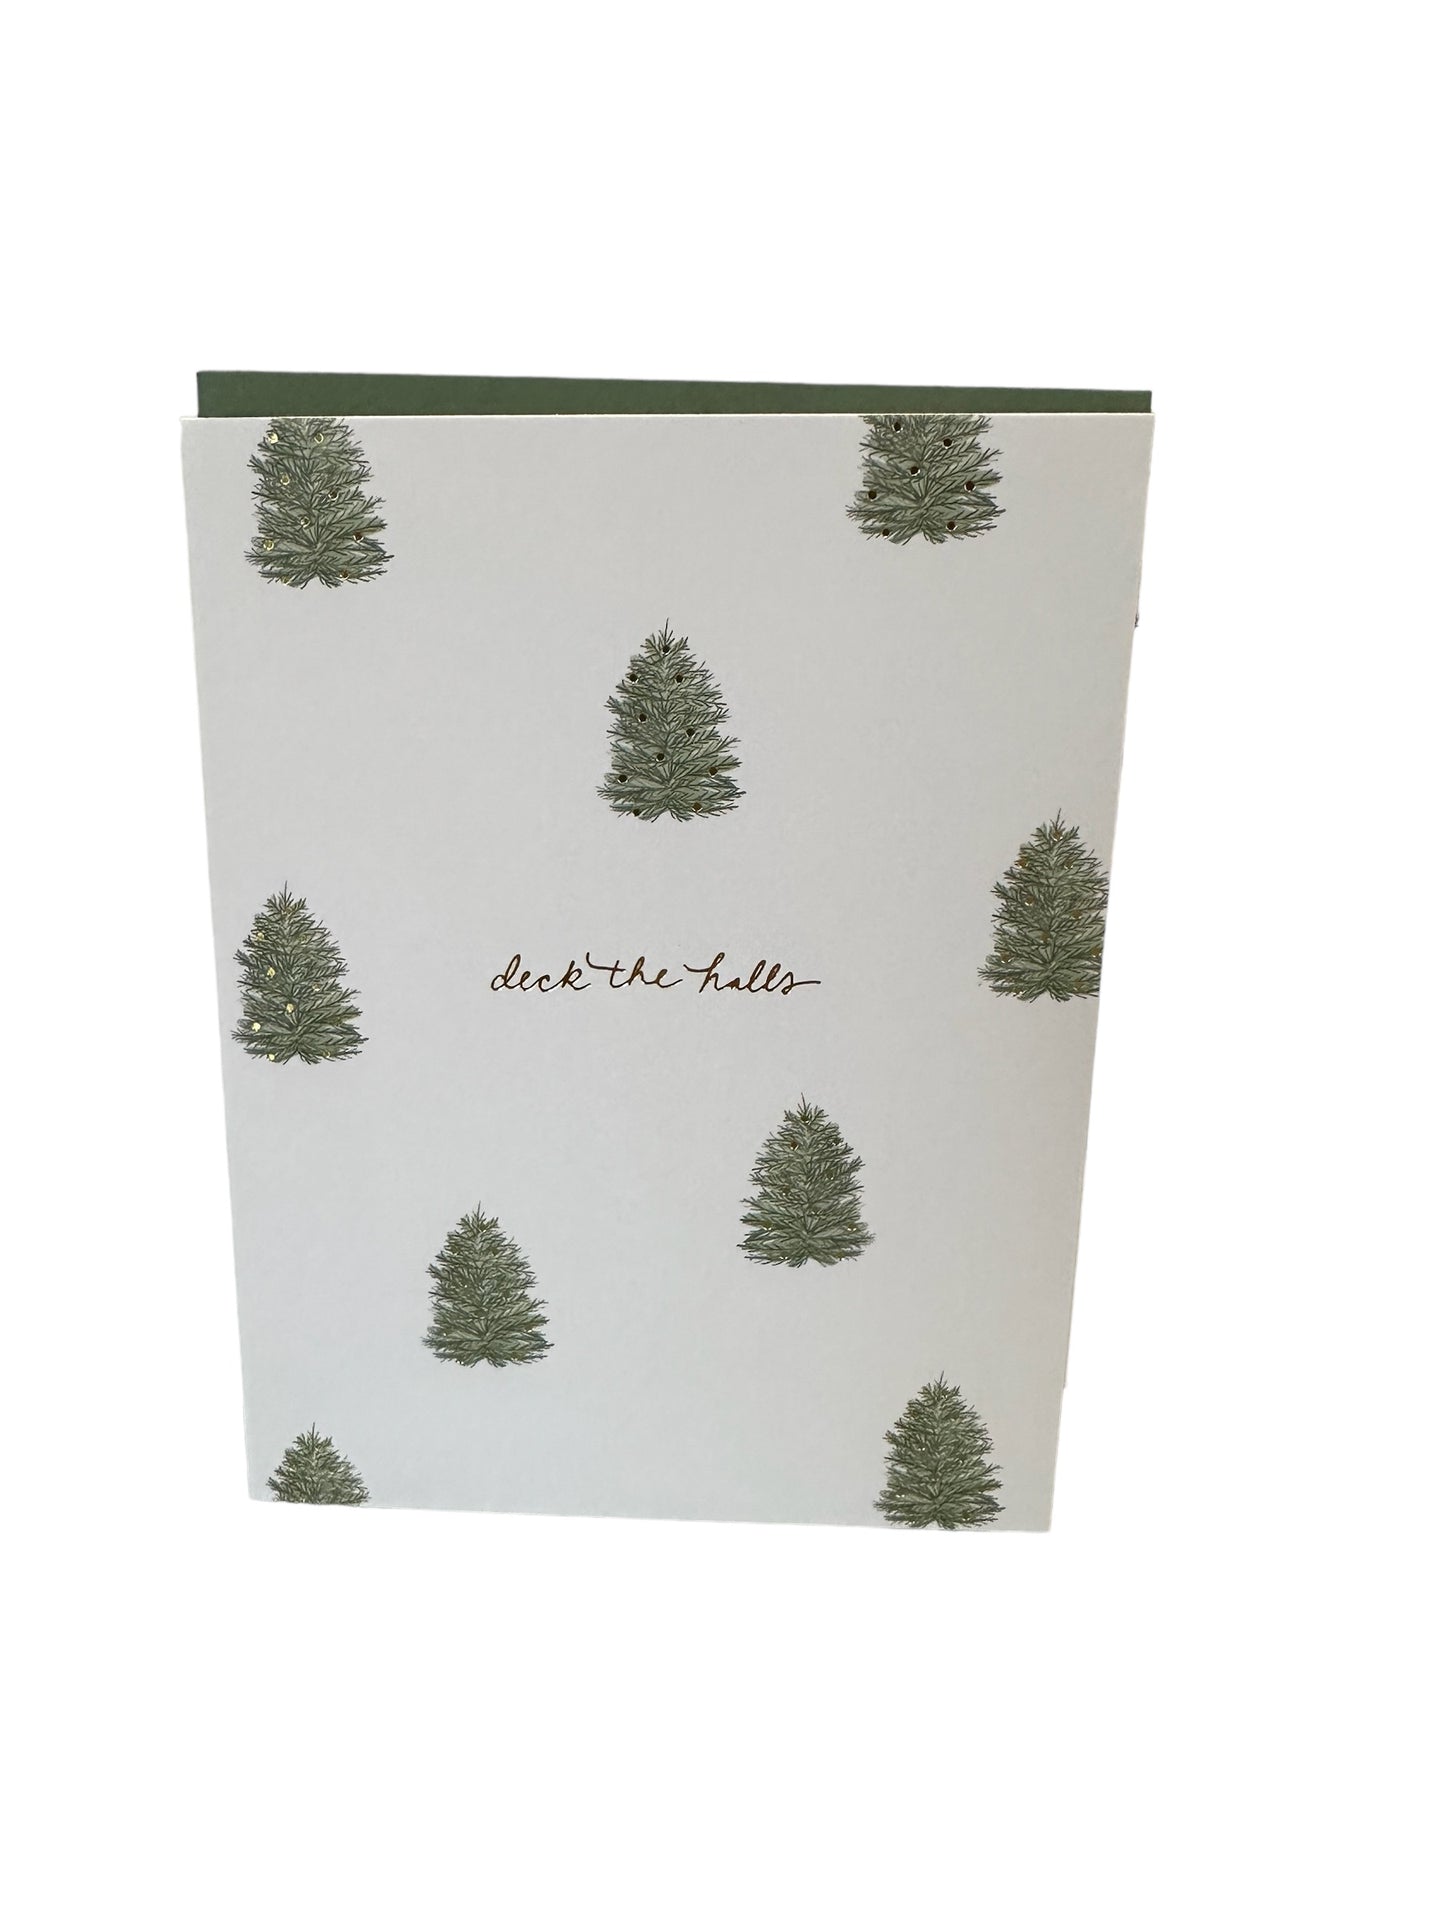 Deck The Halls Trees Card